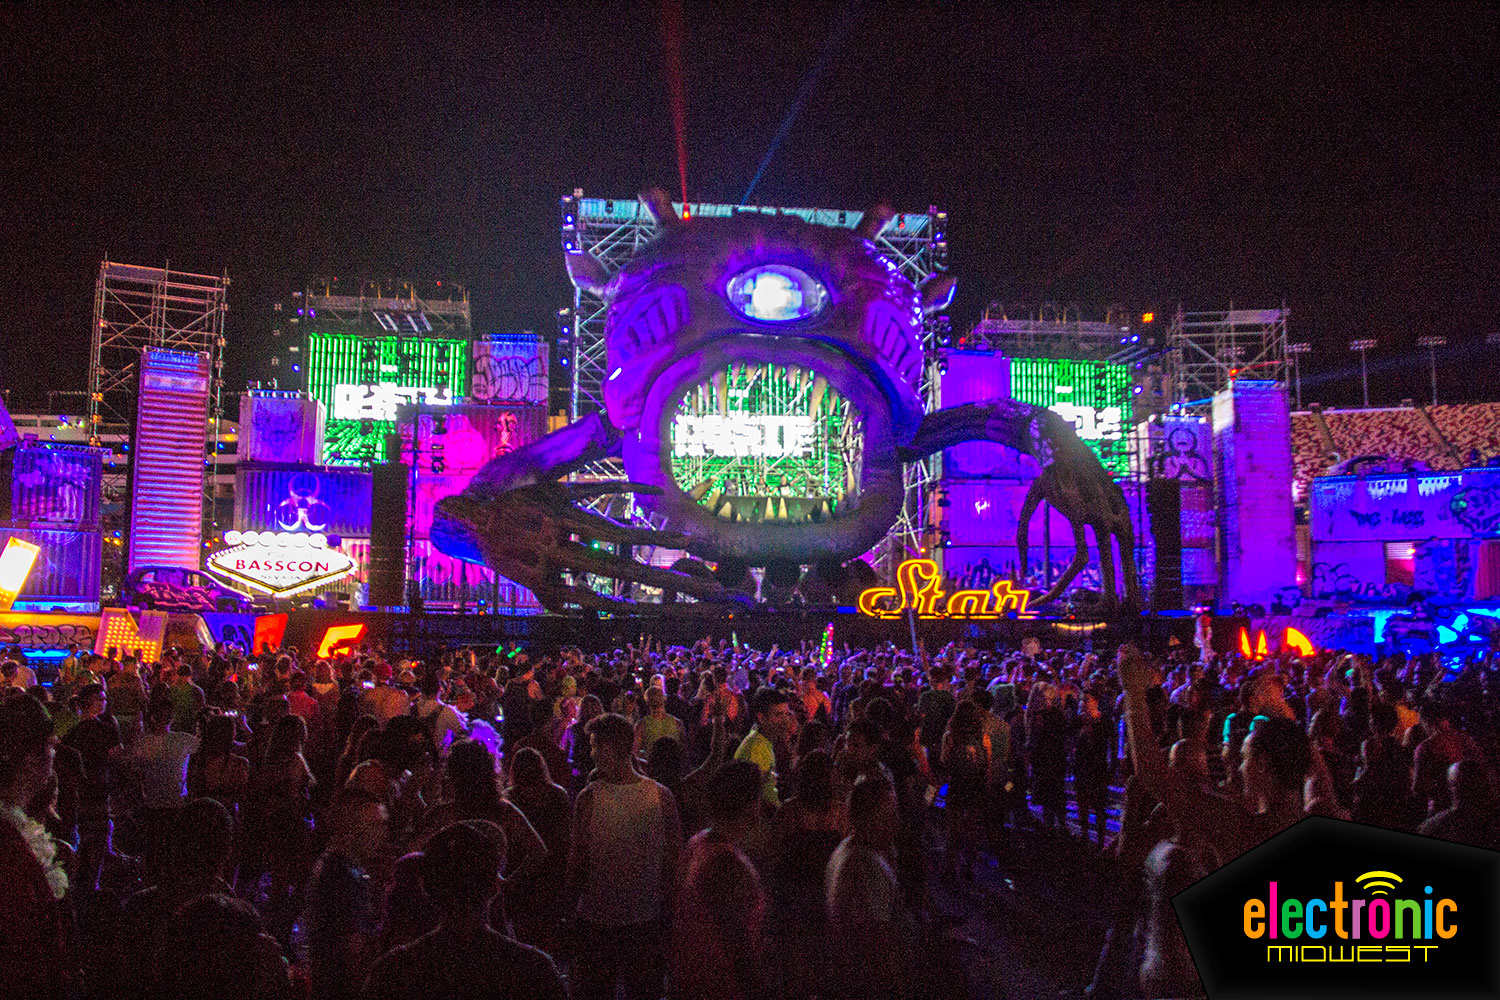 First look: The elaborate stages of EDC Las Vegas 2014 | Electronic Midwest